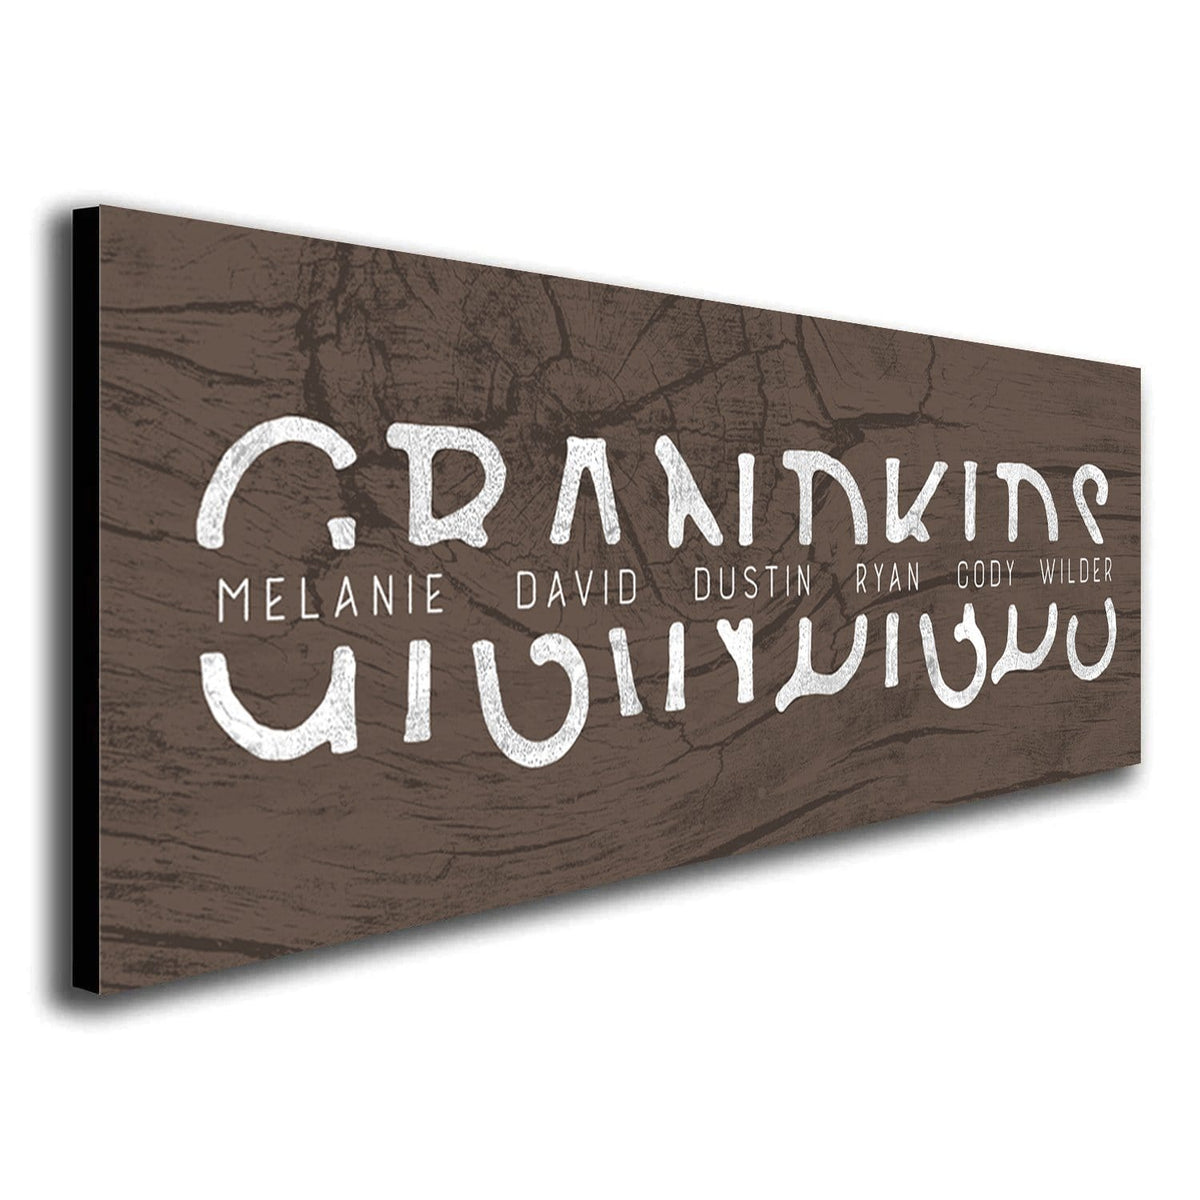 Personalized gift for grandparents with names of grandchildren in the art